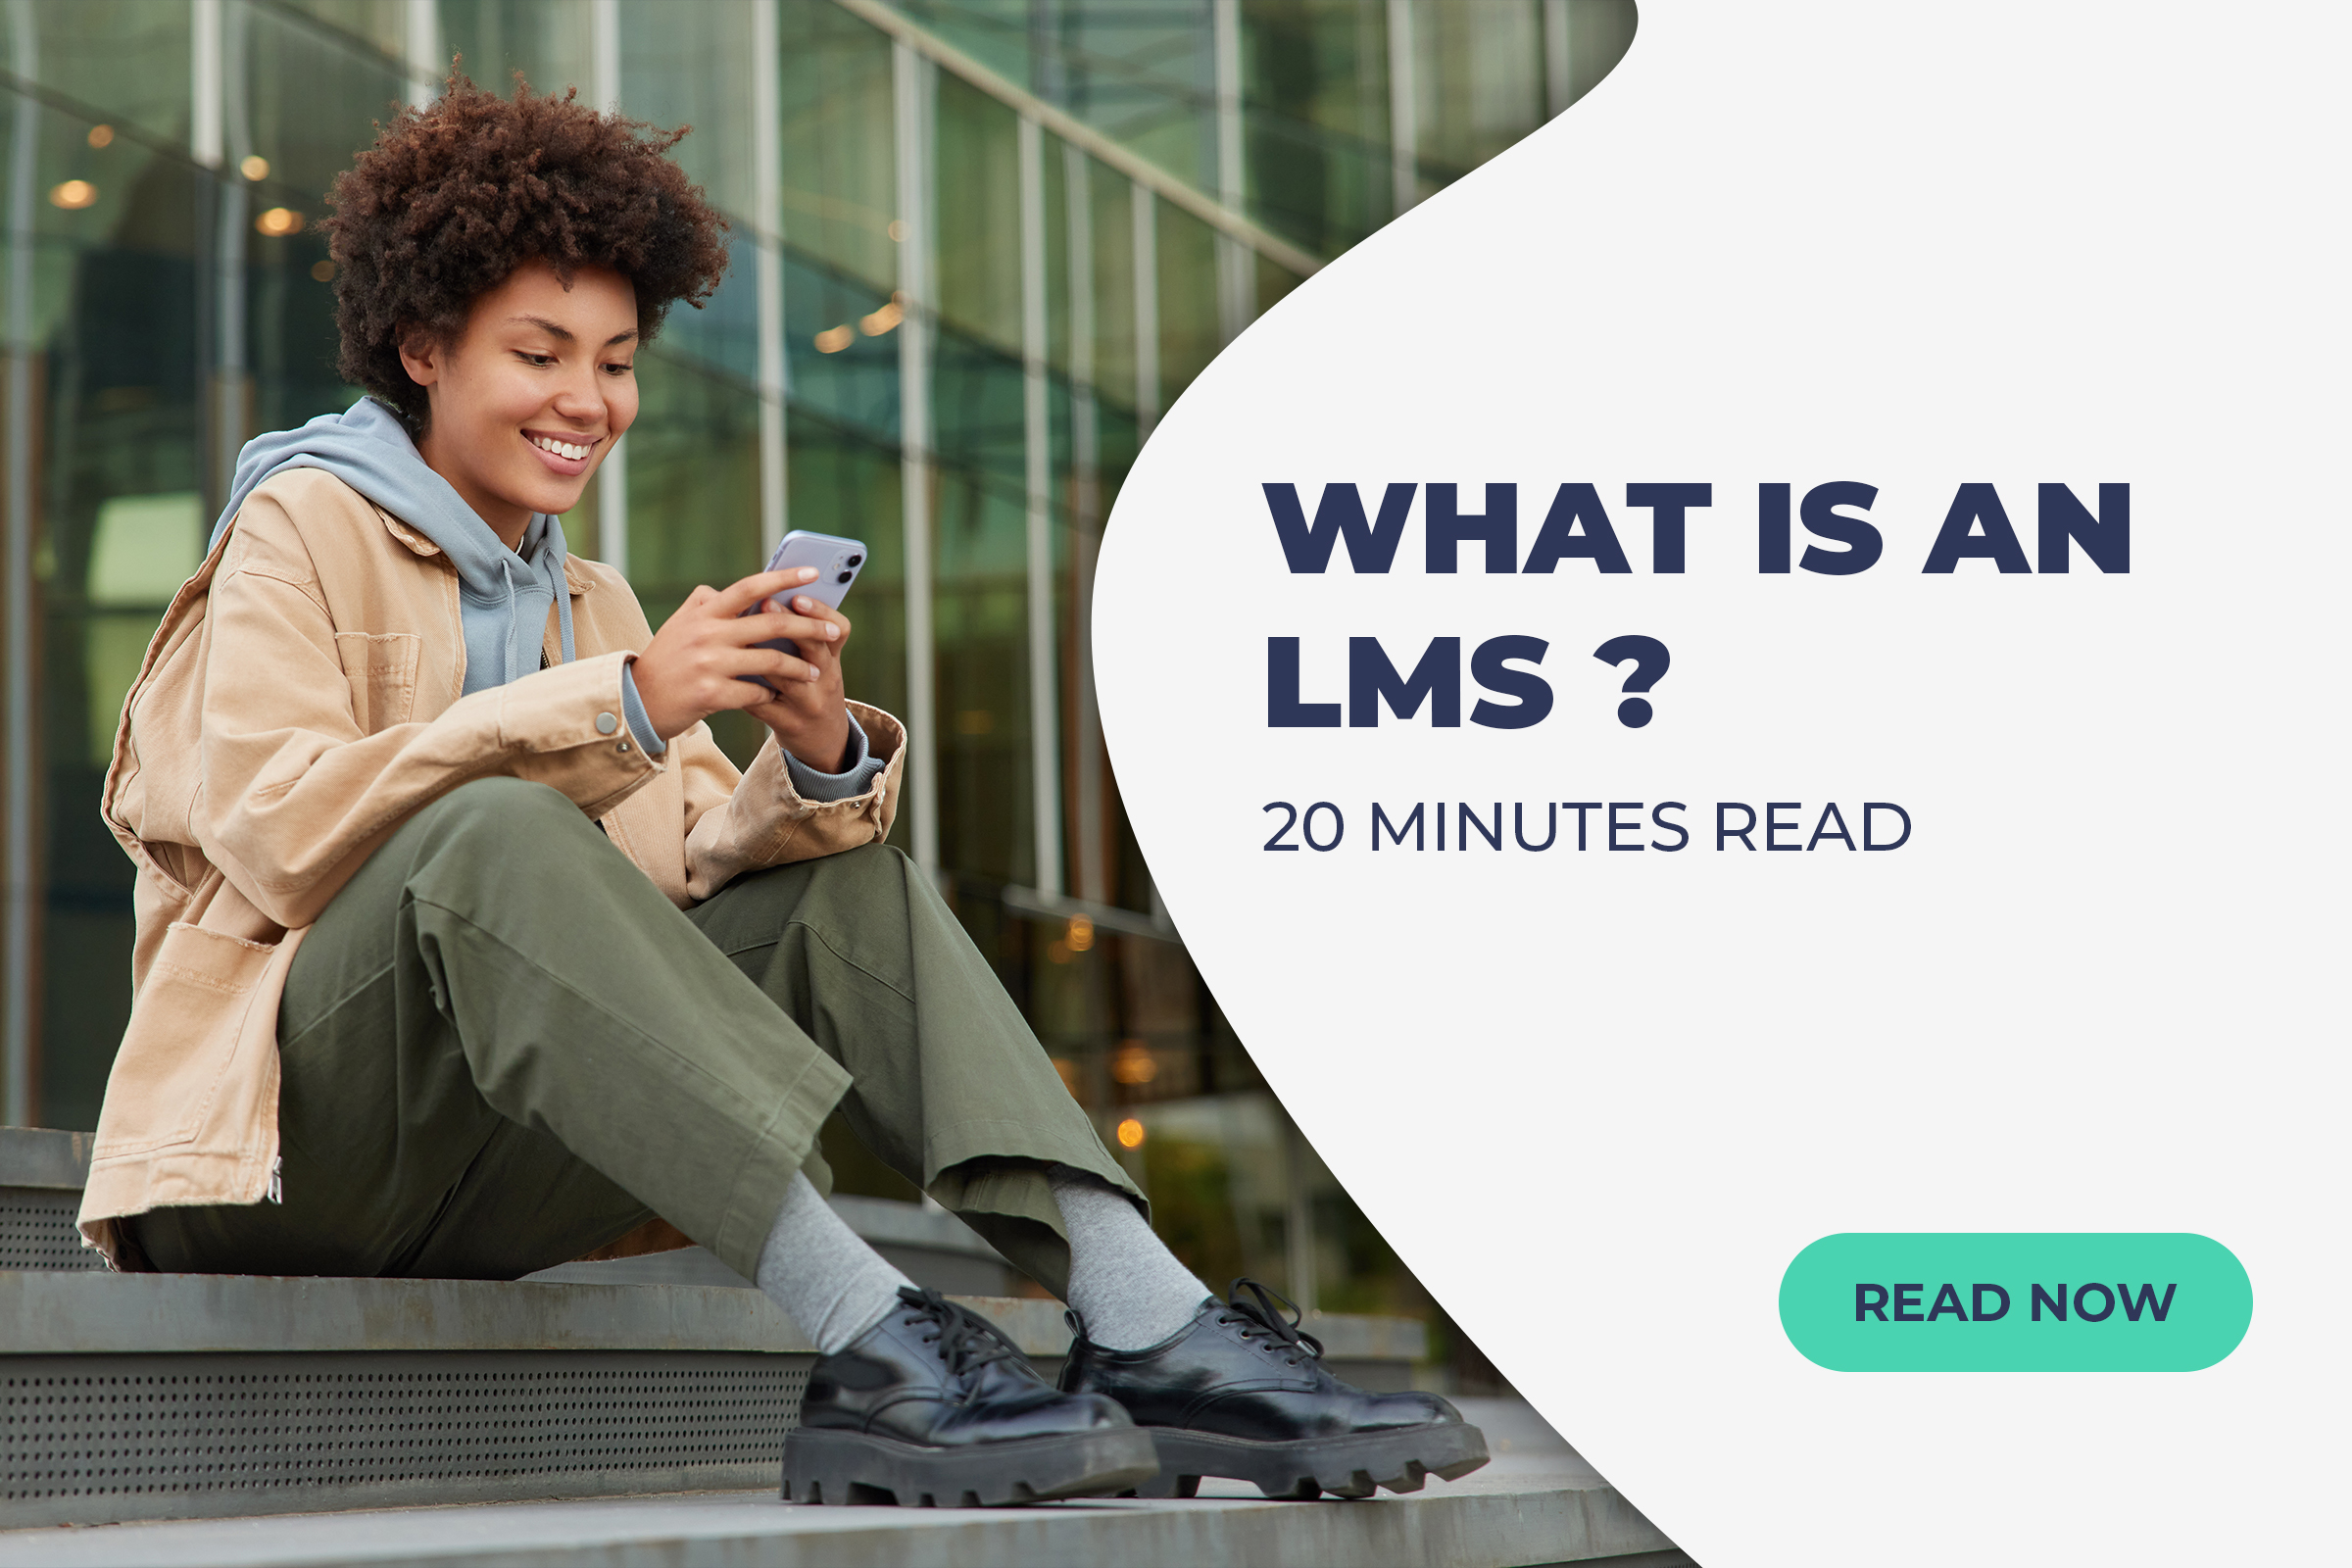 What is an LMS? Women on phone.